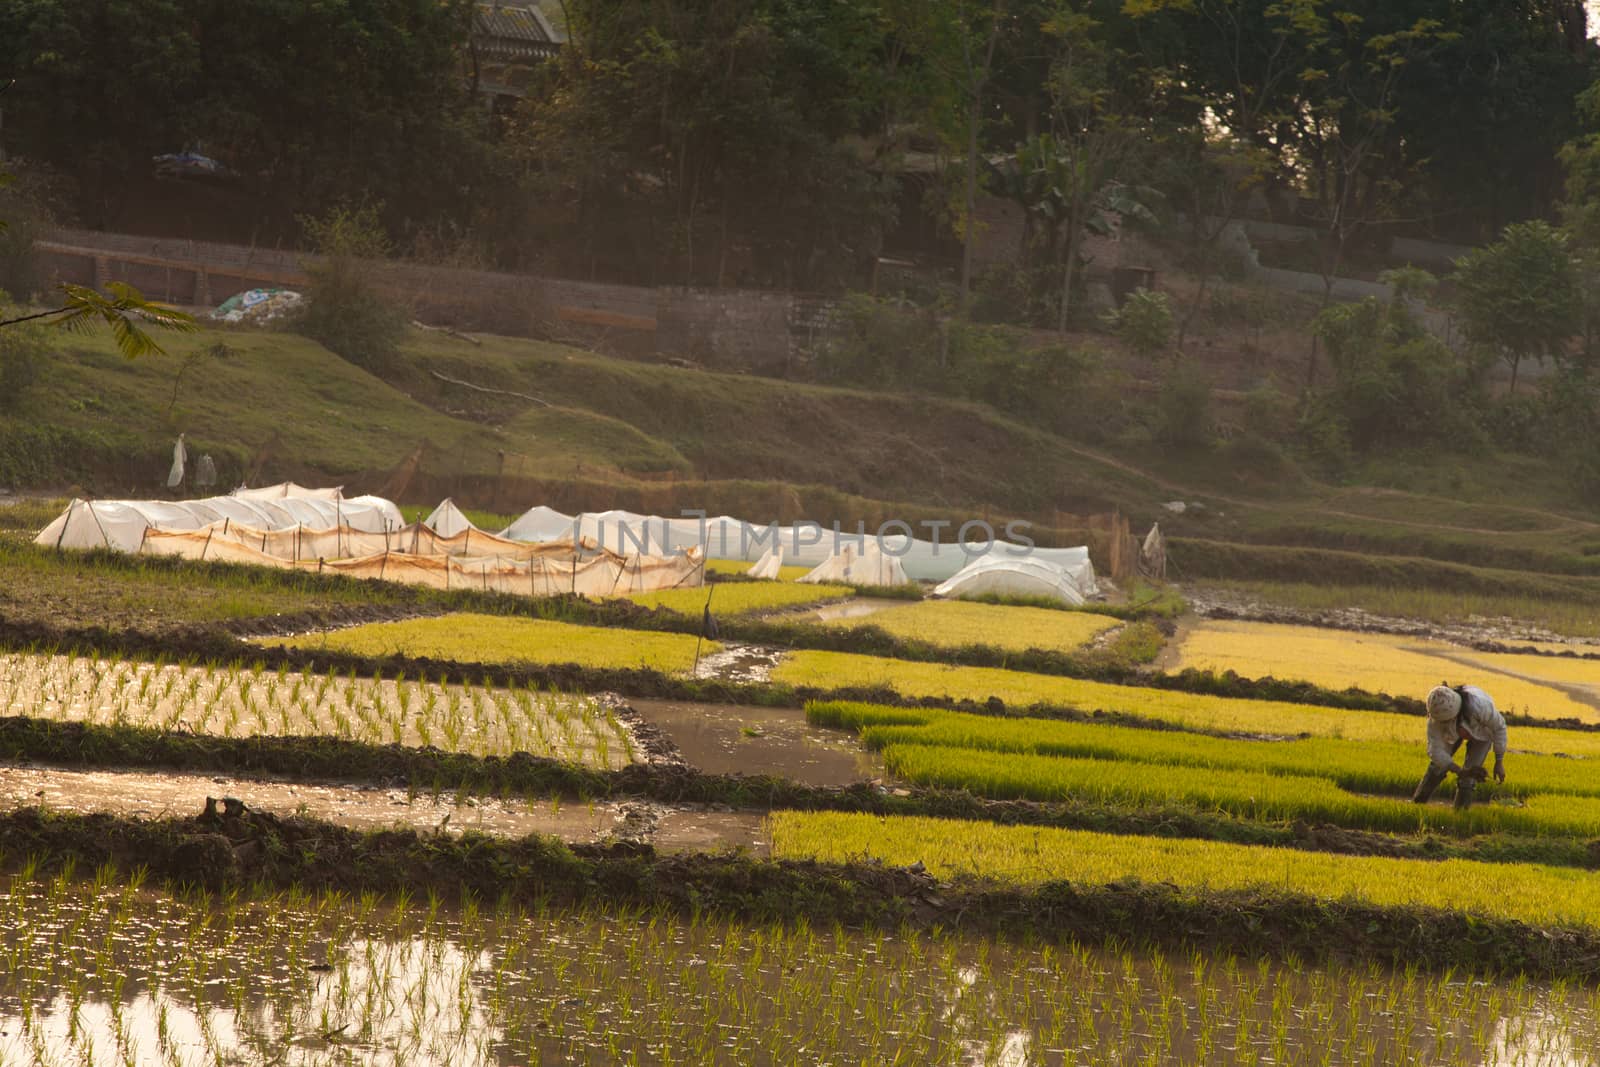 Duong Lam Vietnam 22/12/2013 fields or paddys with rice growing in open farmland by kgboxford